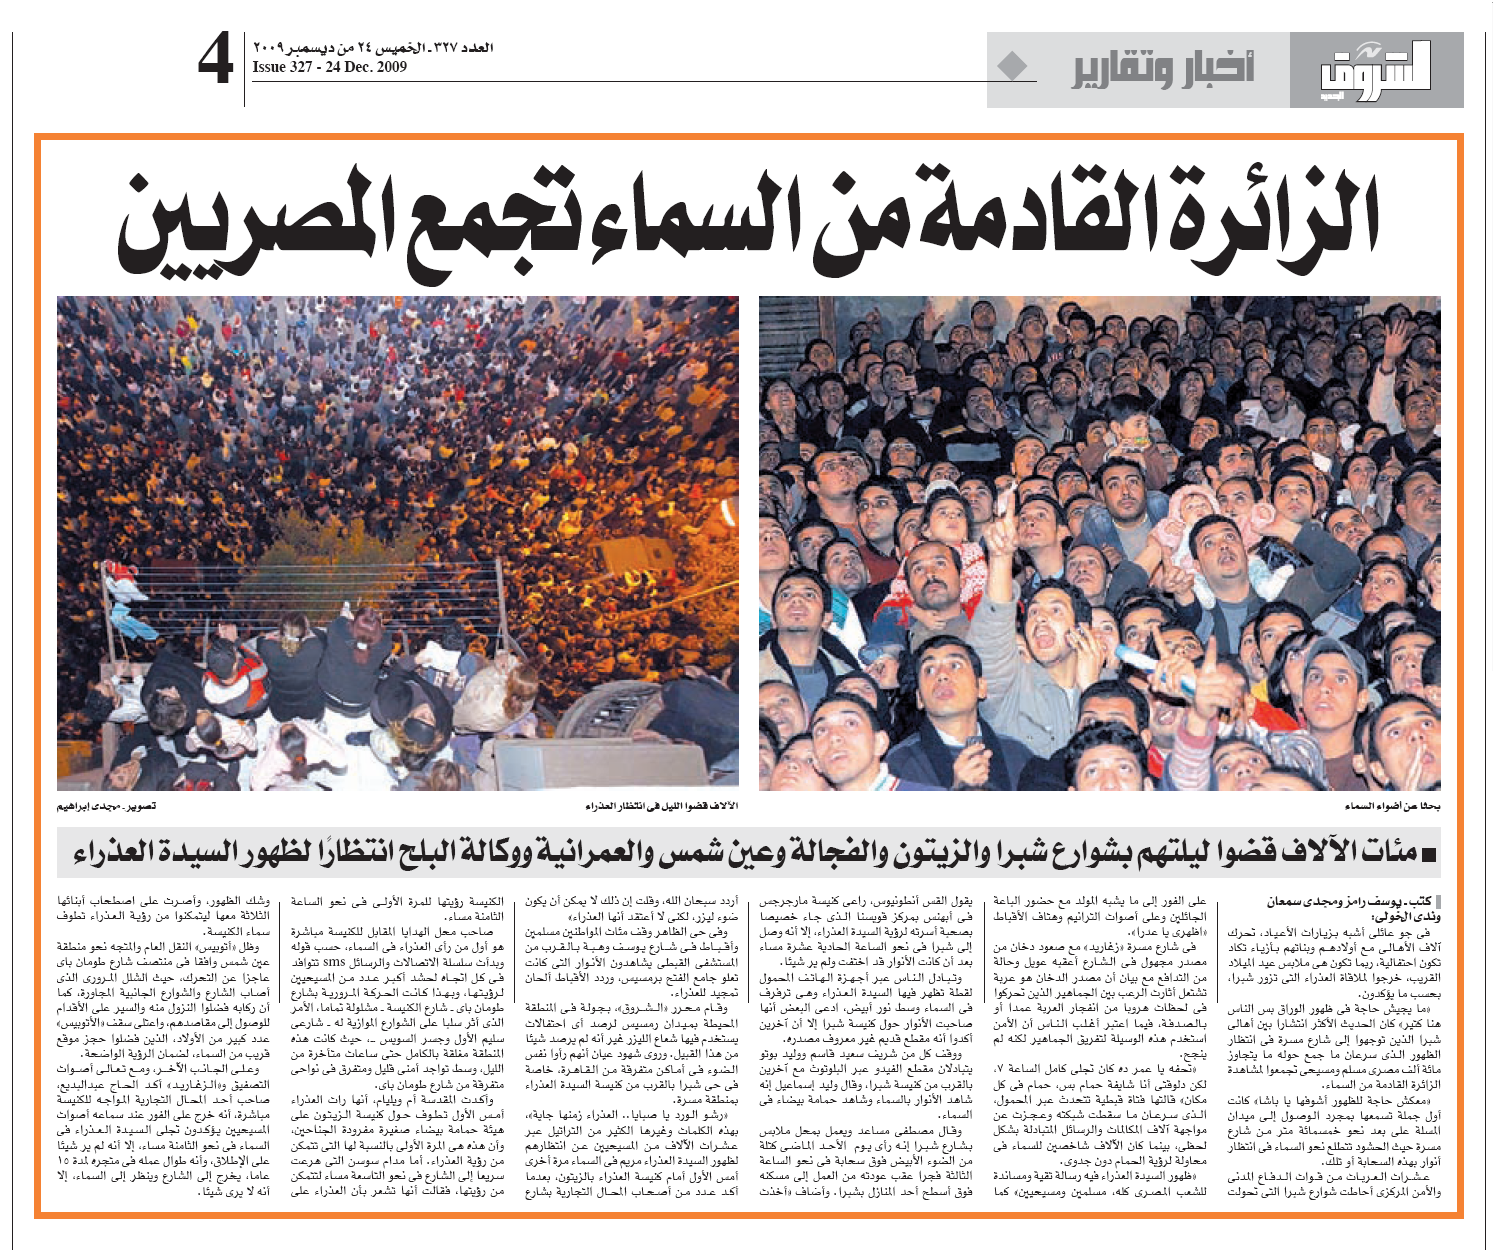 Virgin Mary recent apparitions in various Cairo districts as reporeted by the Egyptian daily A-Shorouq, page 4, December 24, 2009.